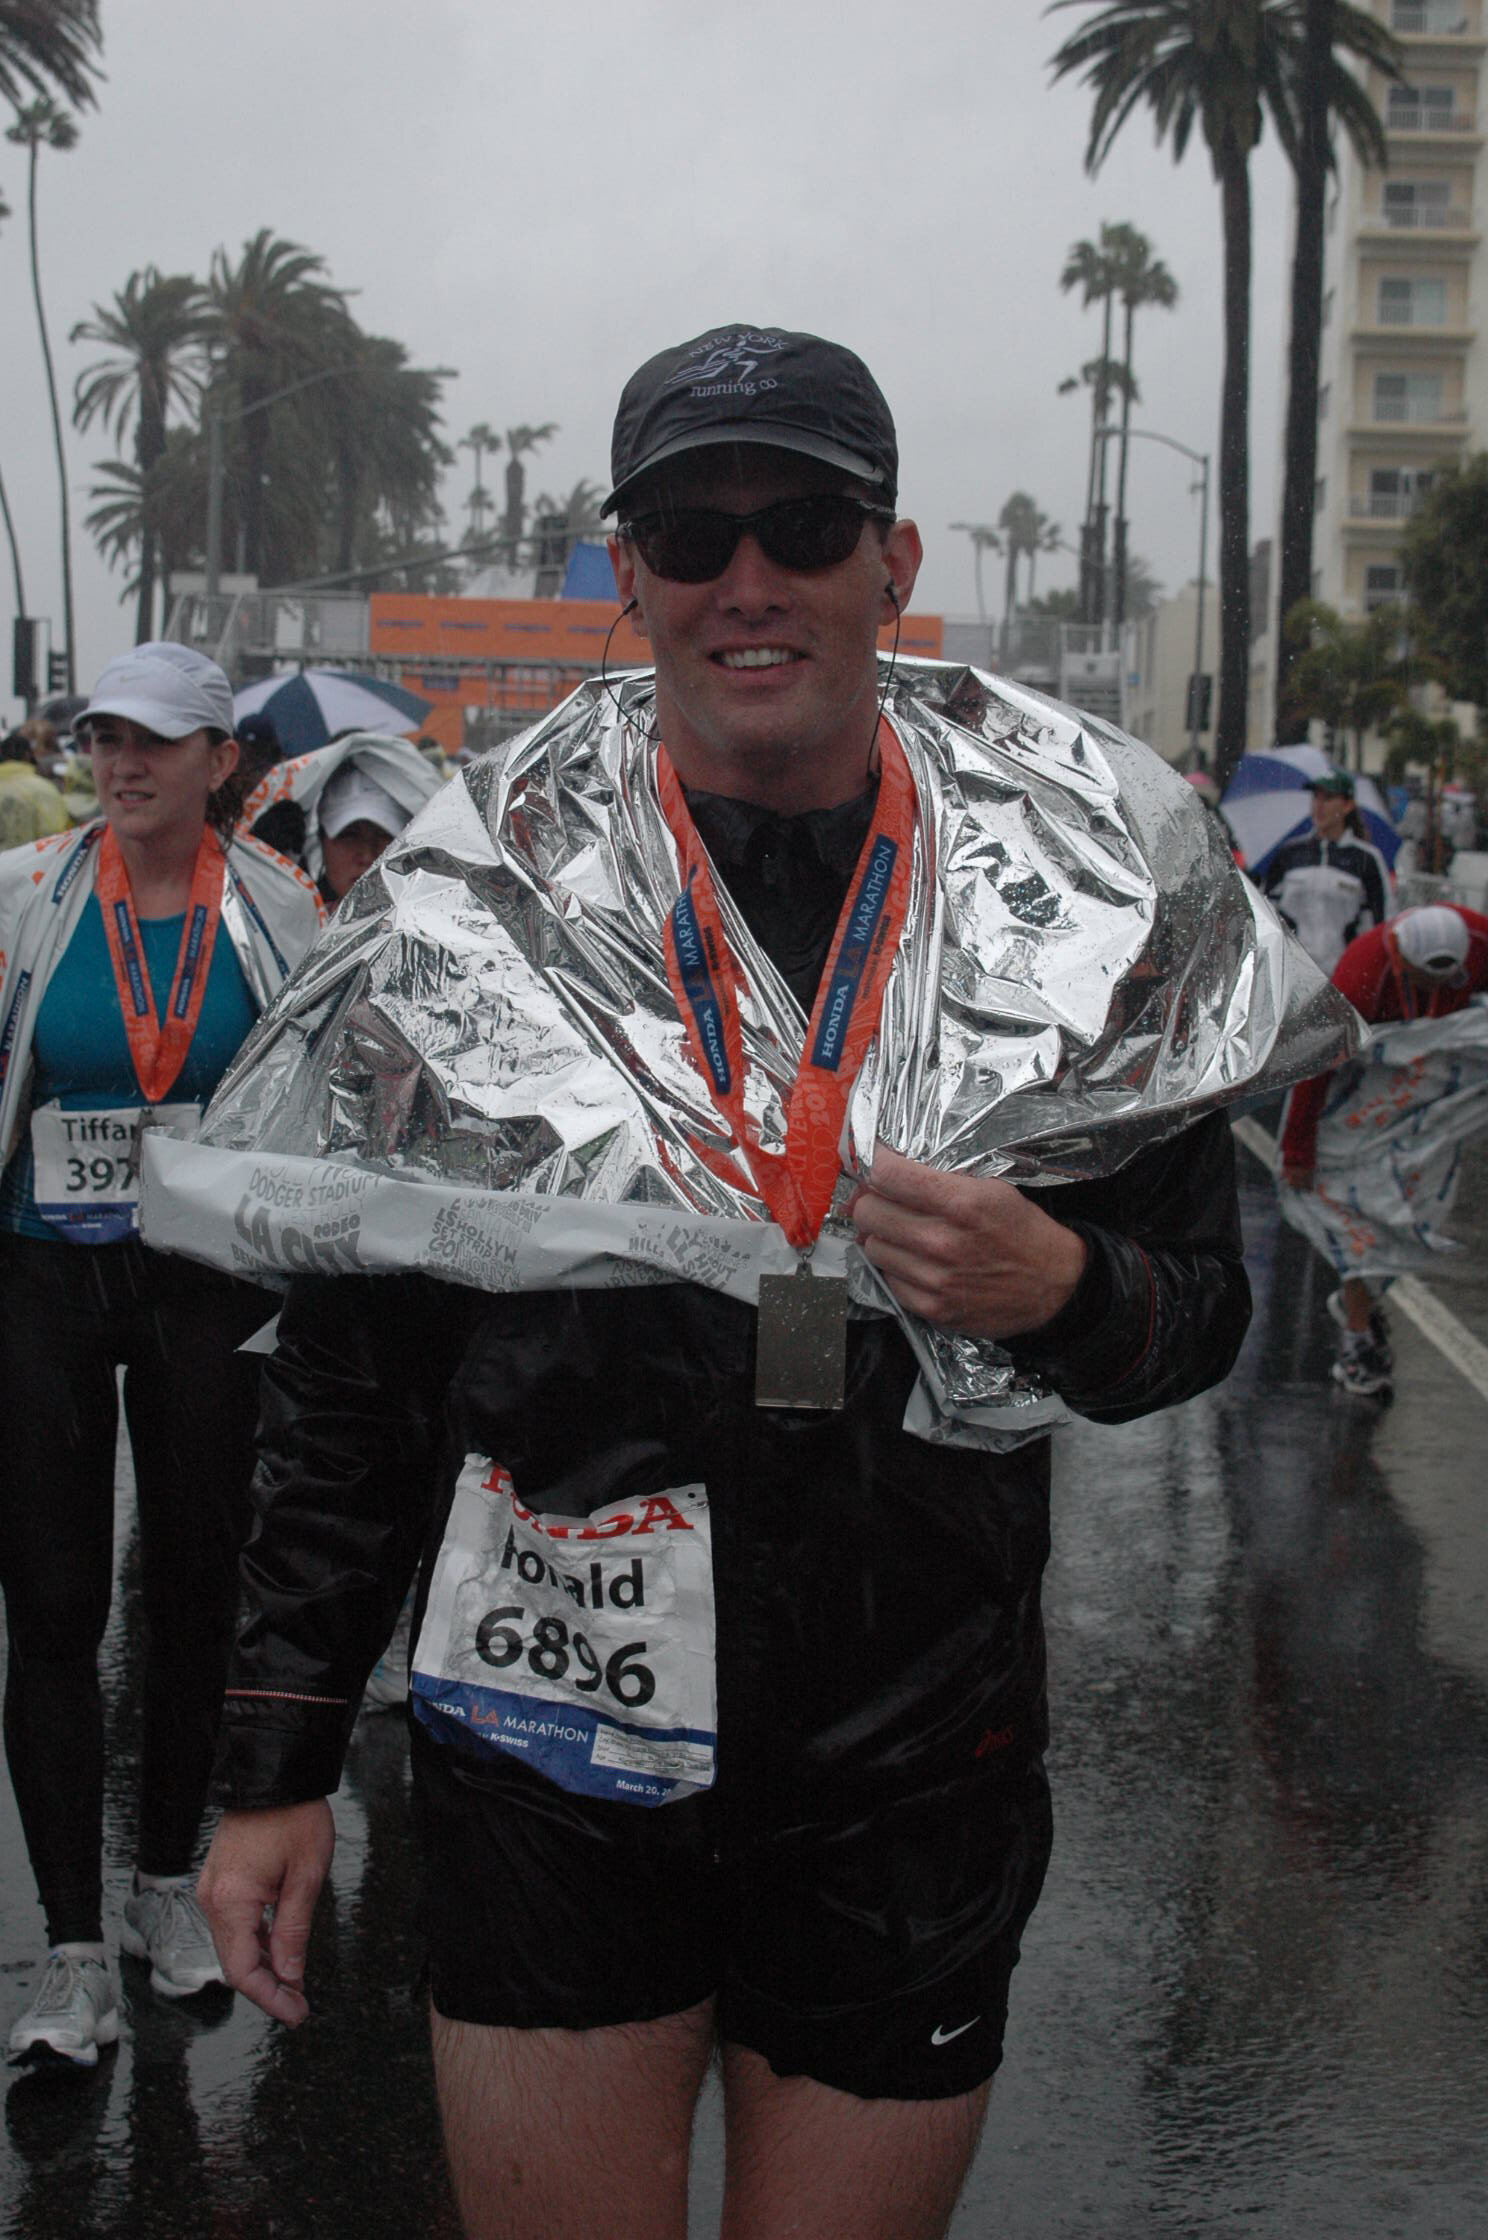  Elation at finishing, and finishing under terrible weather conditions.  